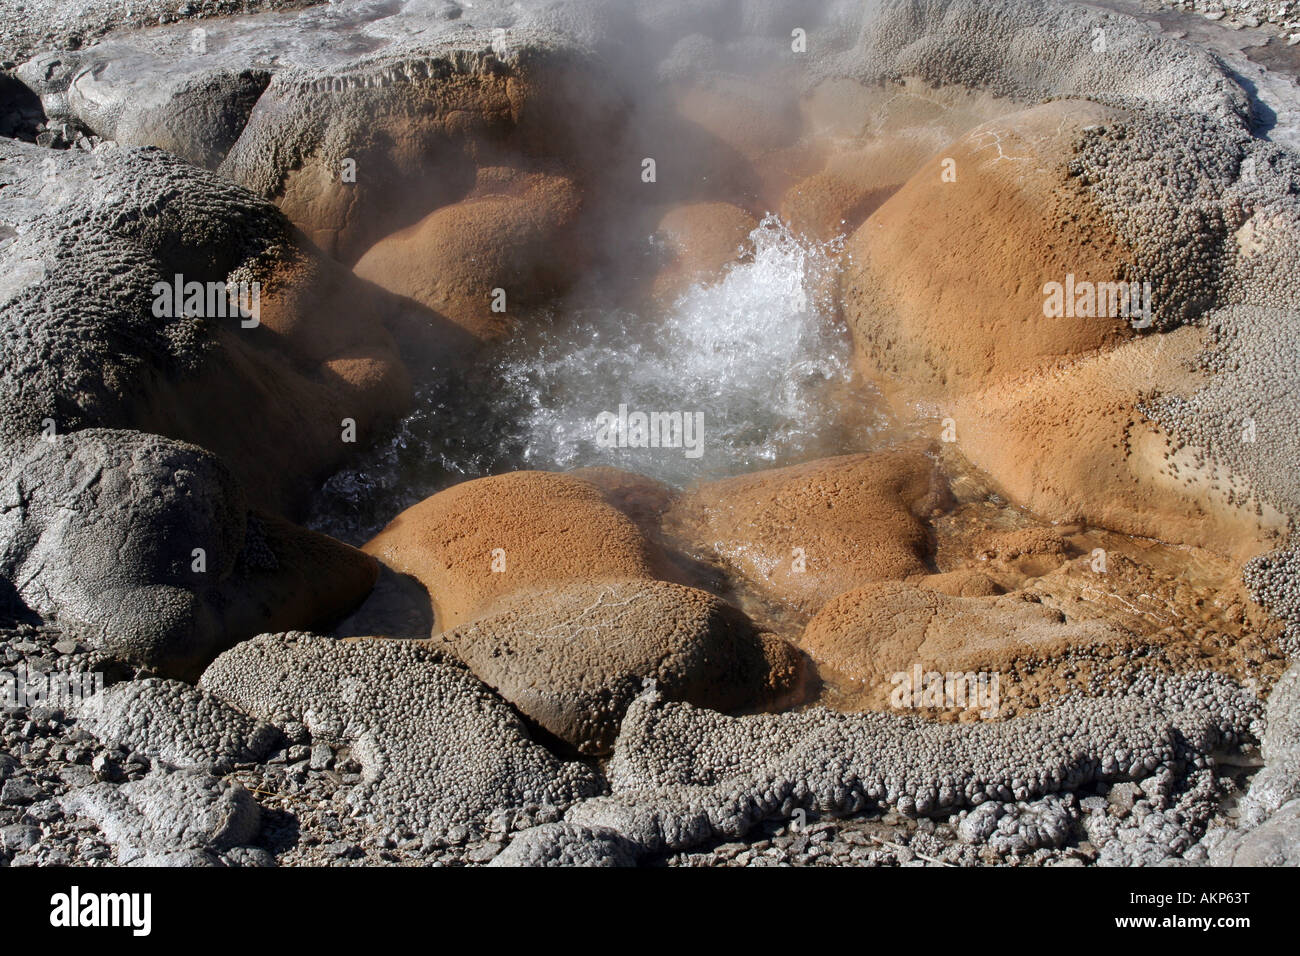 Shell Spring, Biscuit Basin, Yellowstone National Park, Wyoming Stock Photo